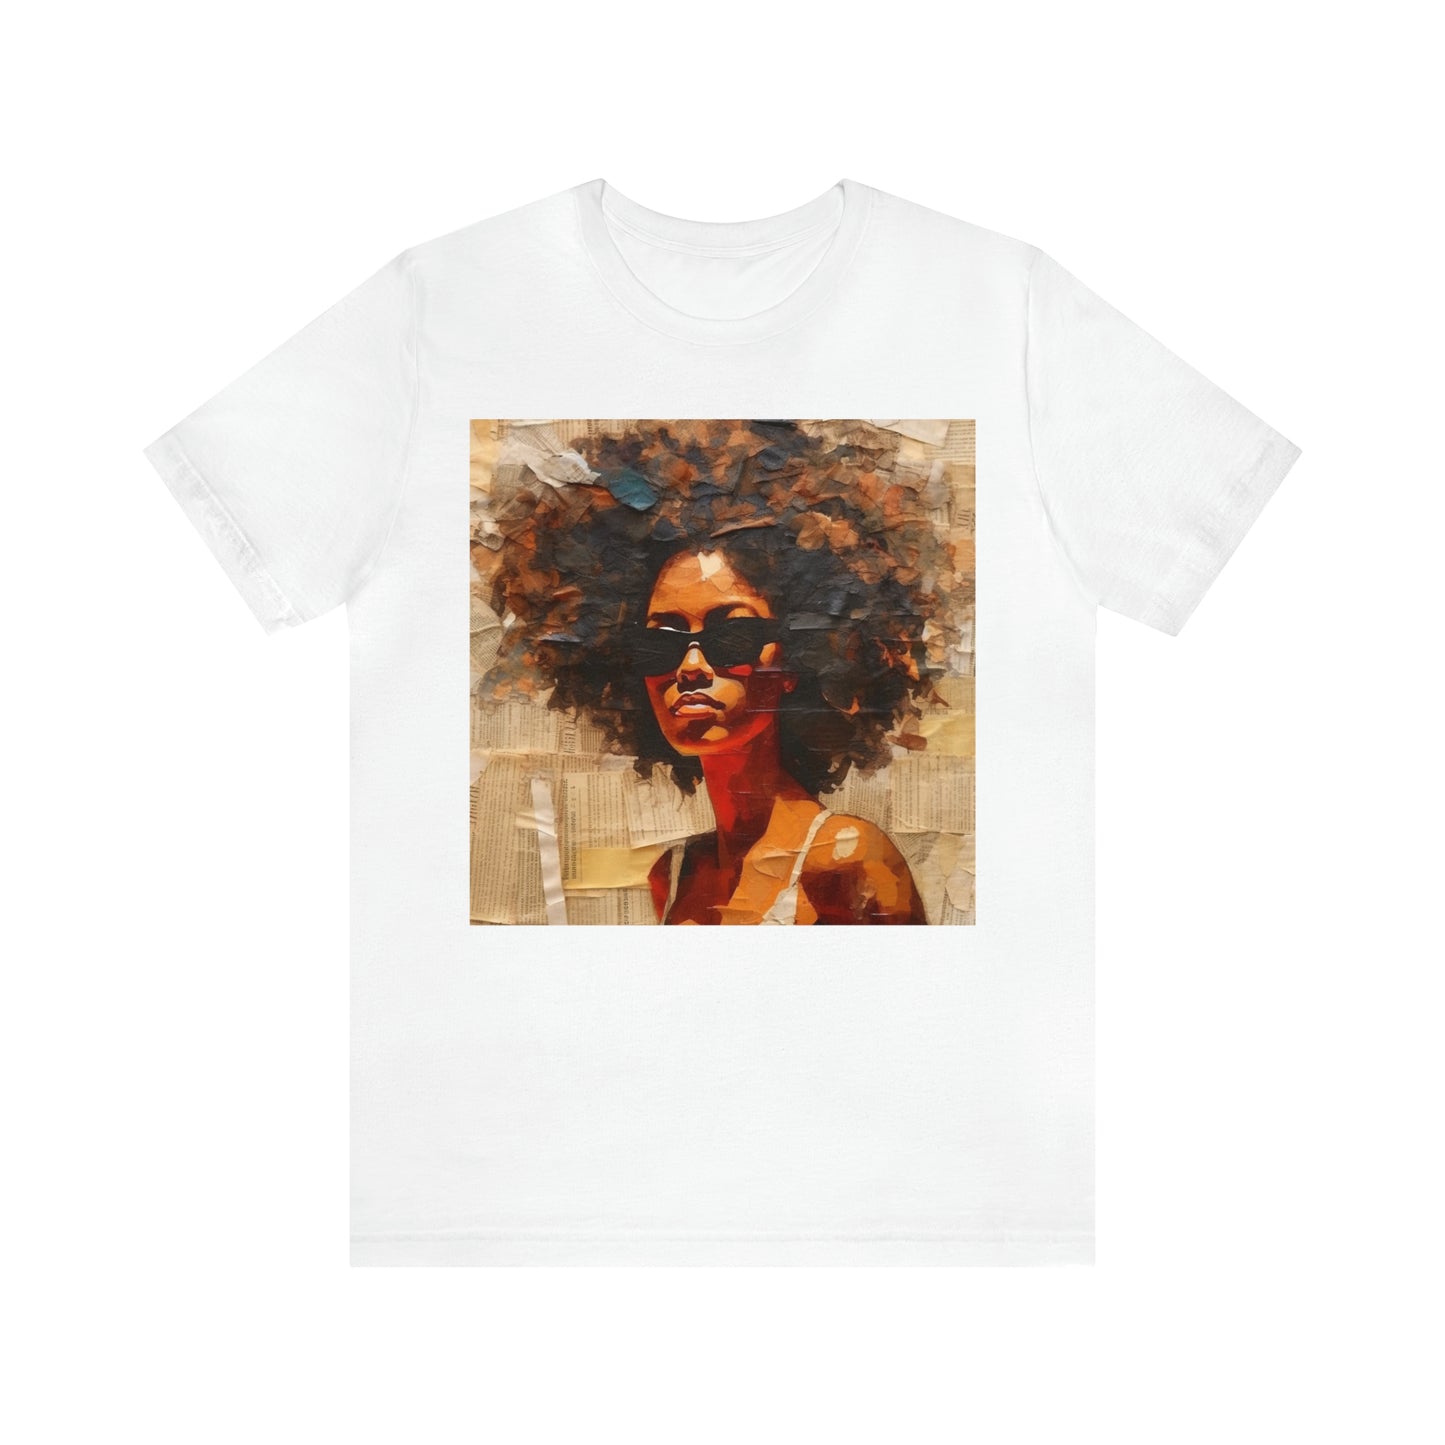 Afro Collage Shirt